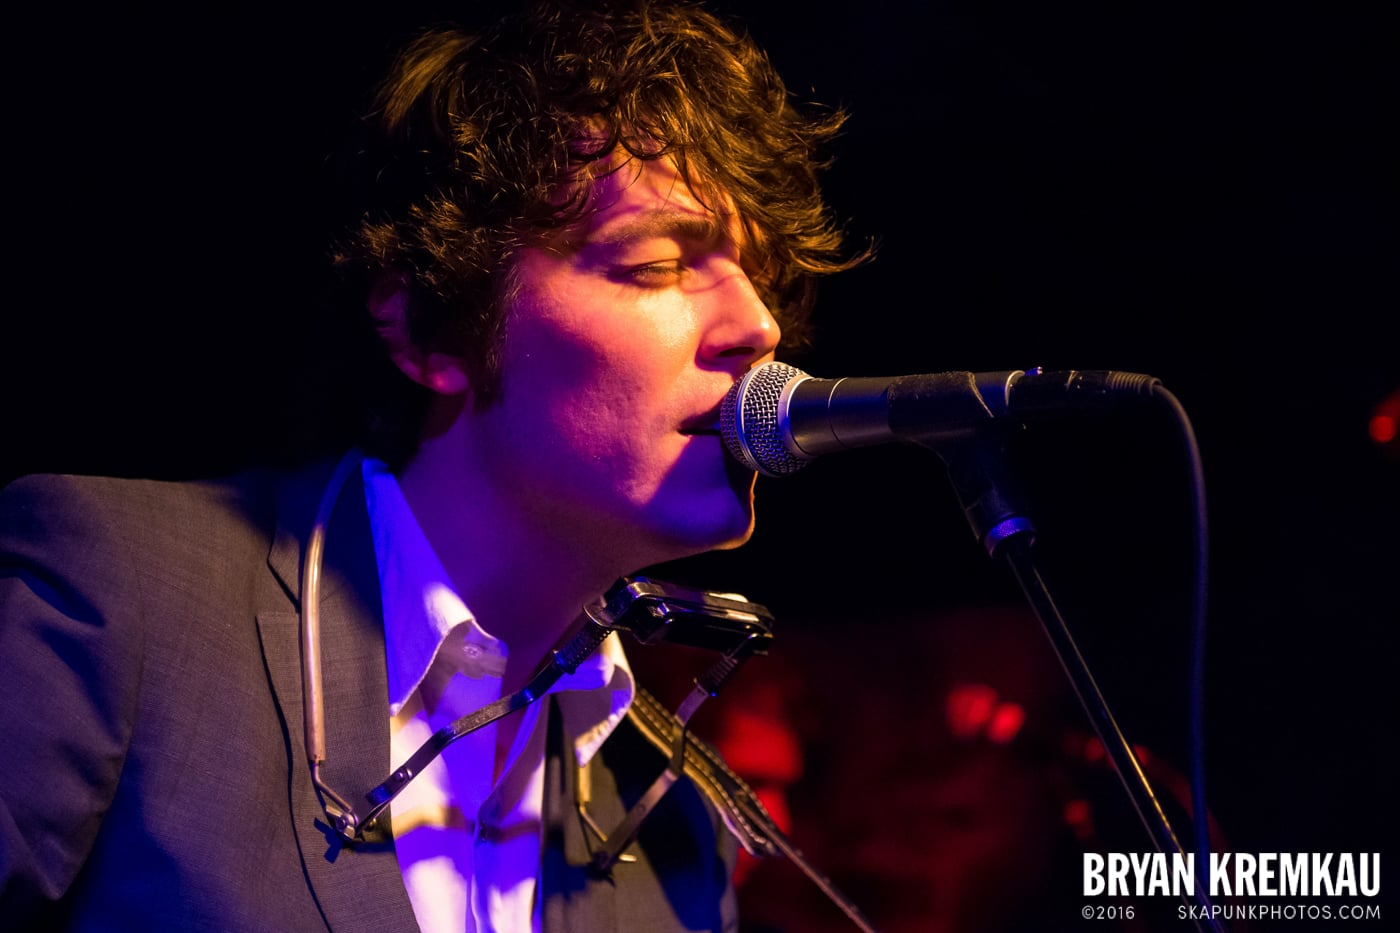 Trapper Schoepp & The Shades @ Bowery Electric, NYC - 11.20.14 (33)